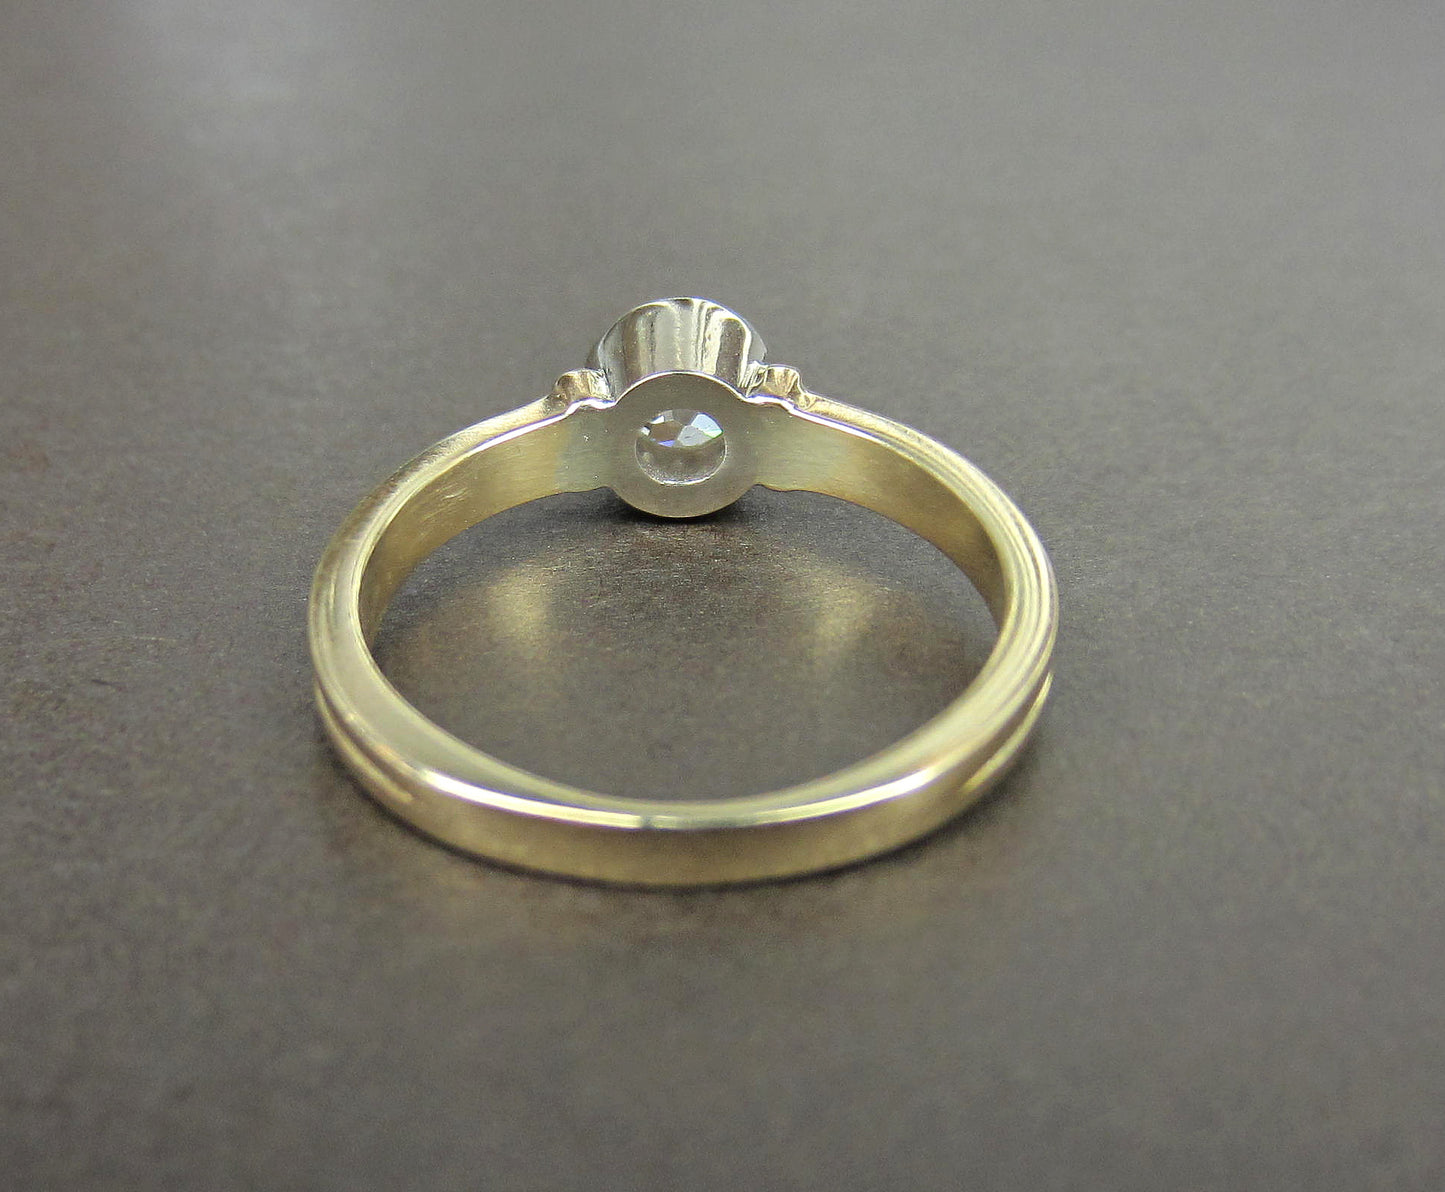 SOLD--Old Mine Diamond .52ct Engagement Ring 14k